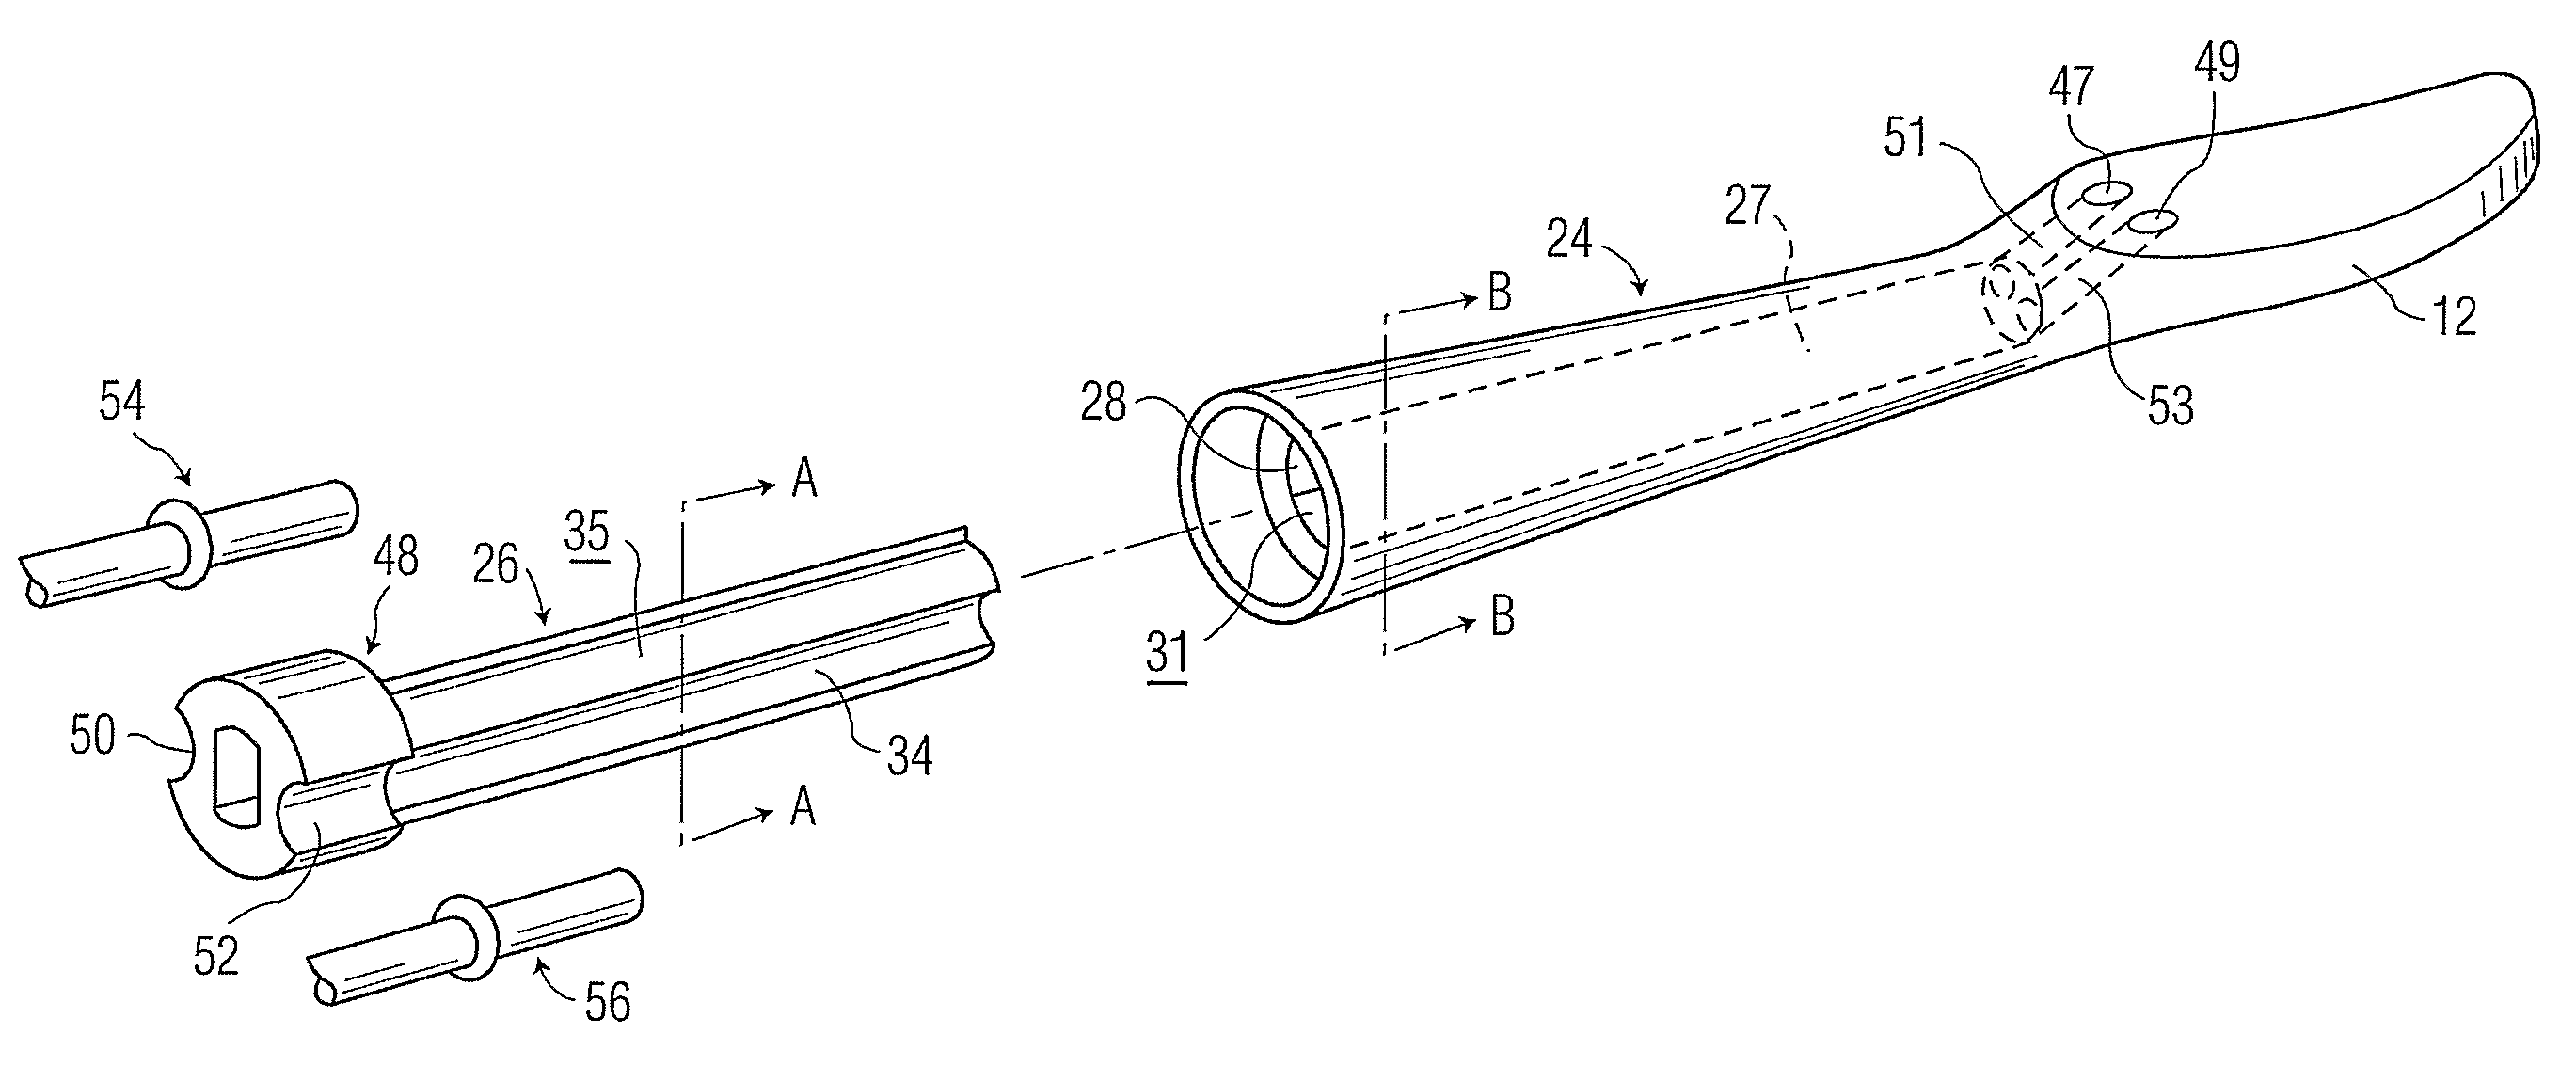 Brushhead stem with core channels for dispensing fluids